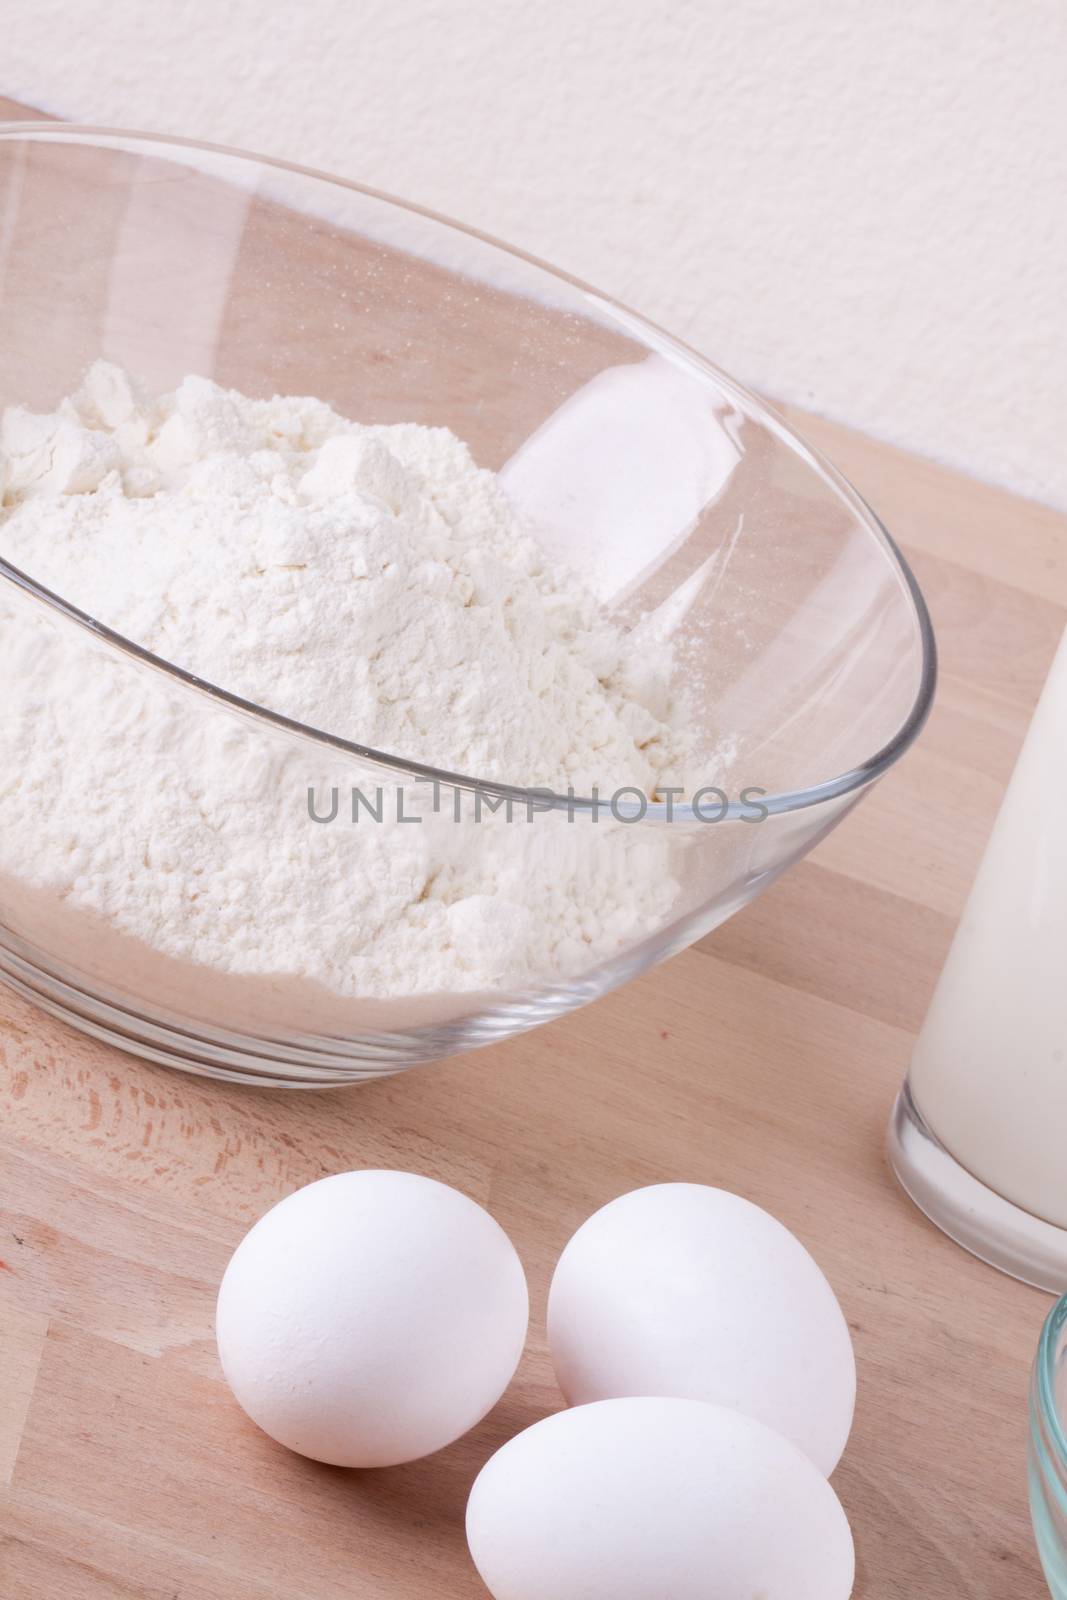 Baking ingredients in the kitchen with a bowl of flour, eggs, sugar, jug of milk and butter ready to bake a cake or make batter